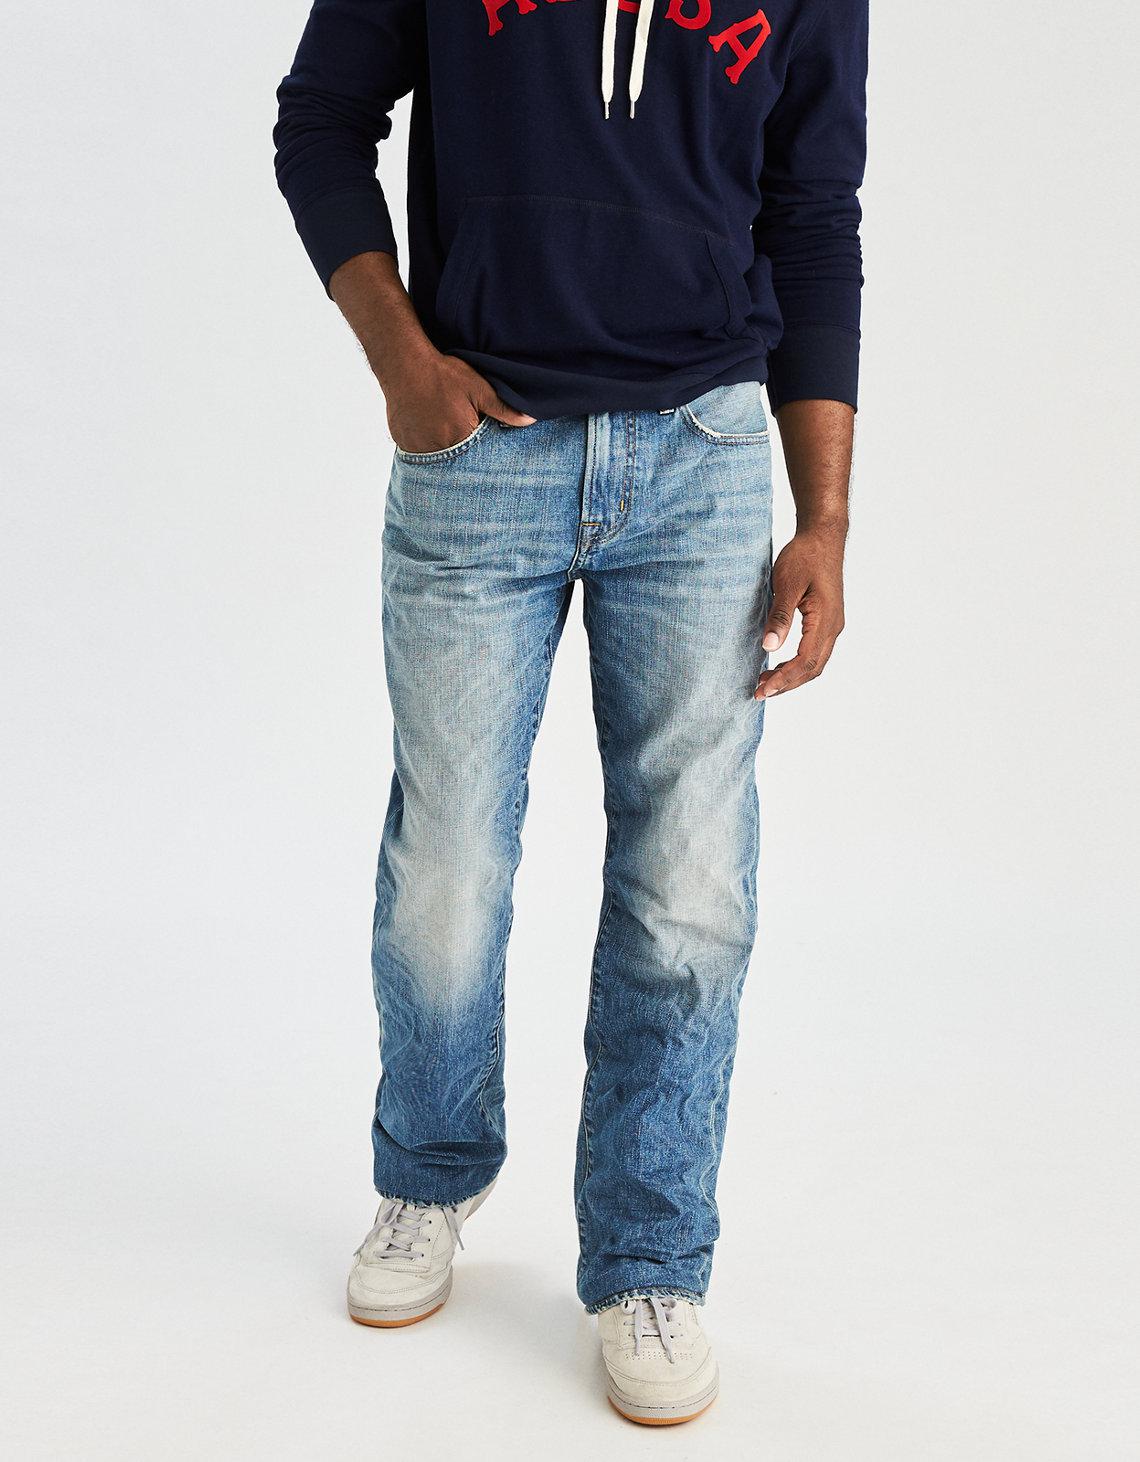 Lyst - American Eagle Ae Classic Bootcut Jean in Blue for Men